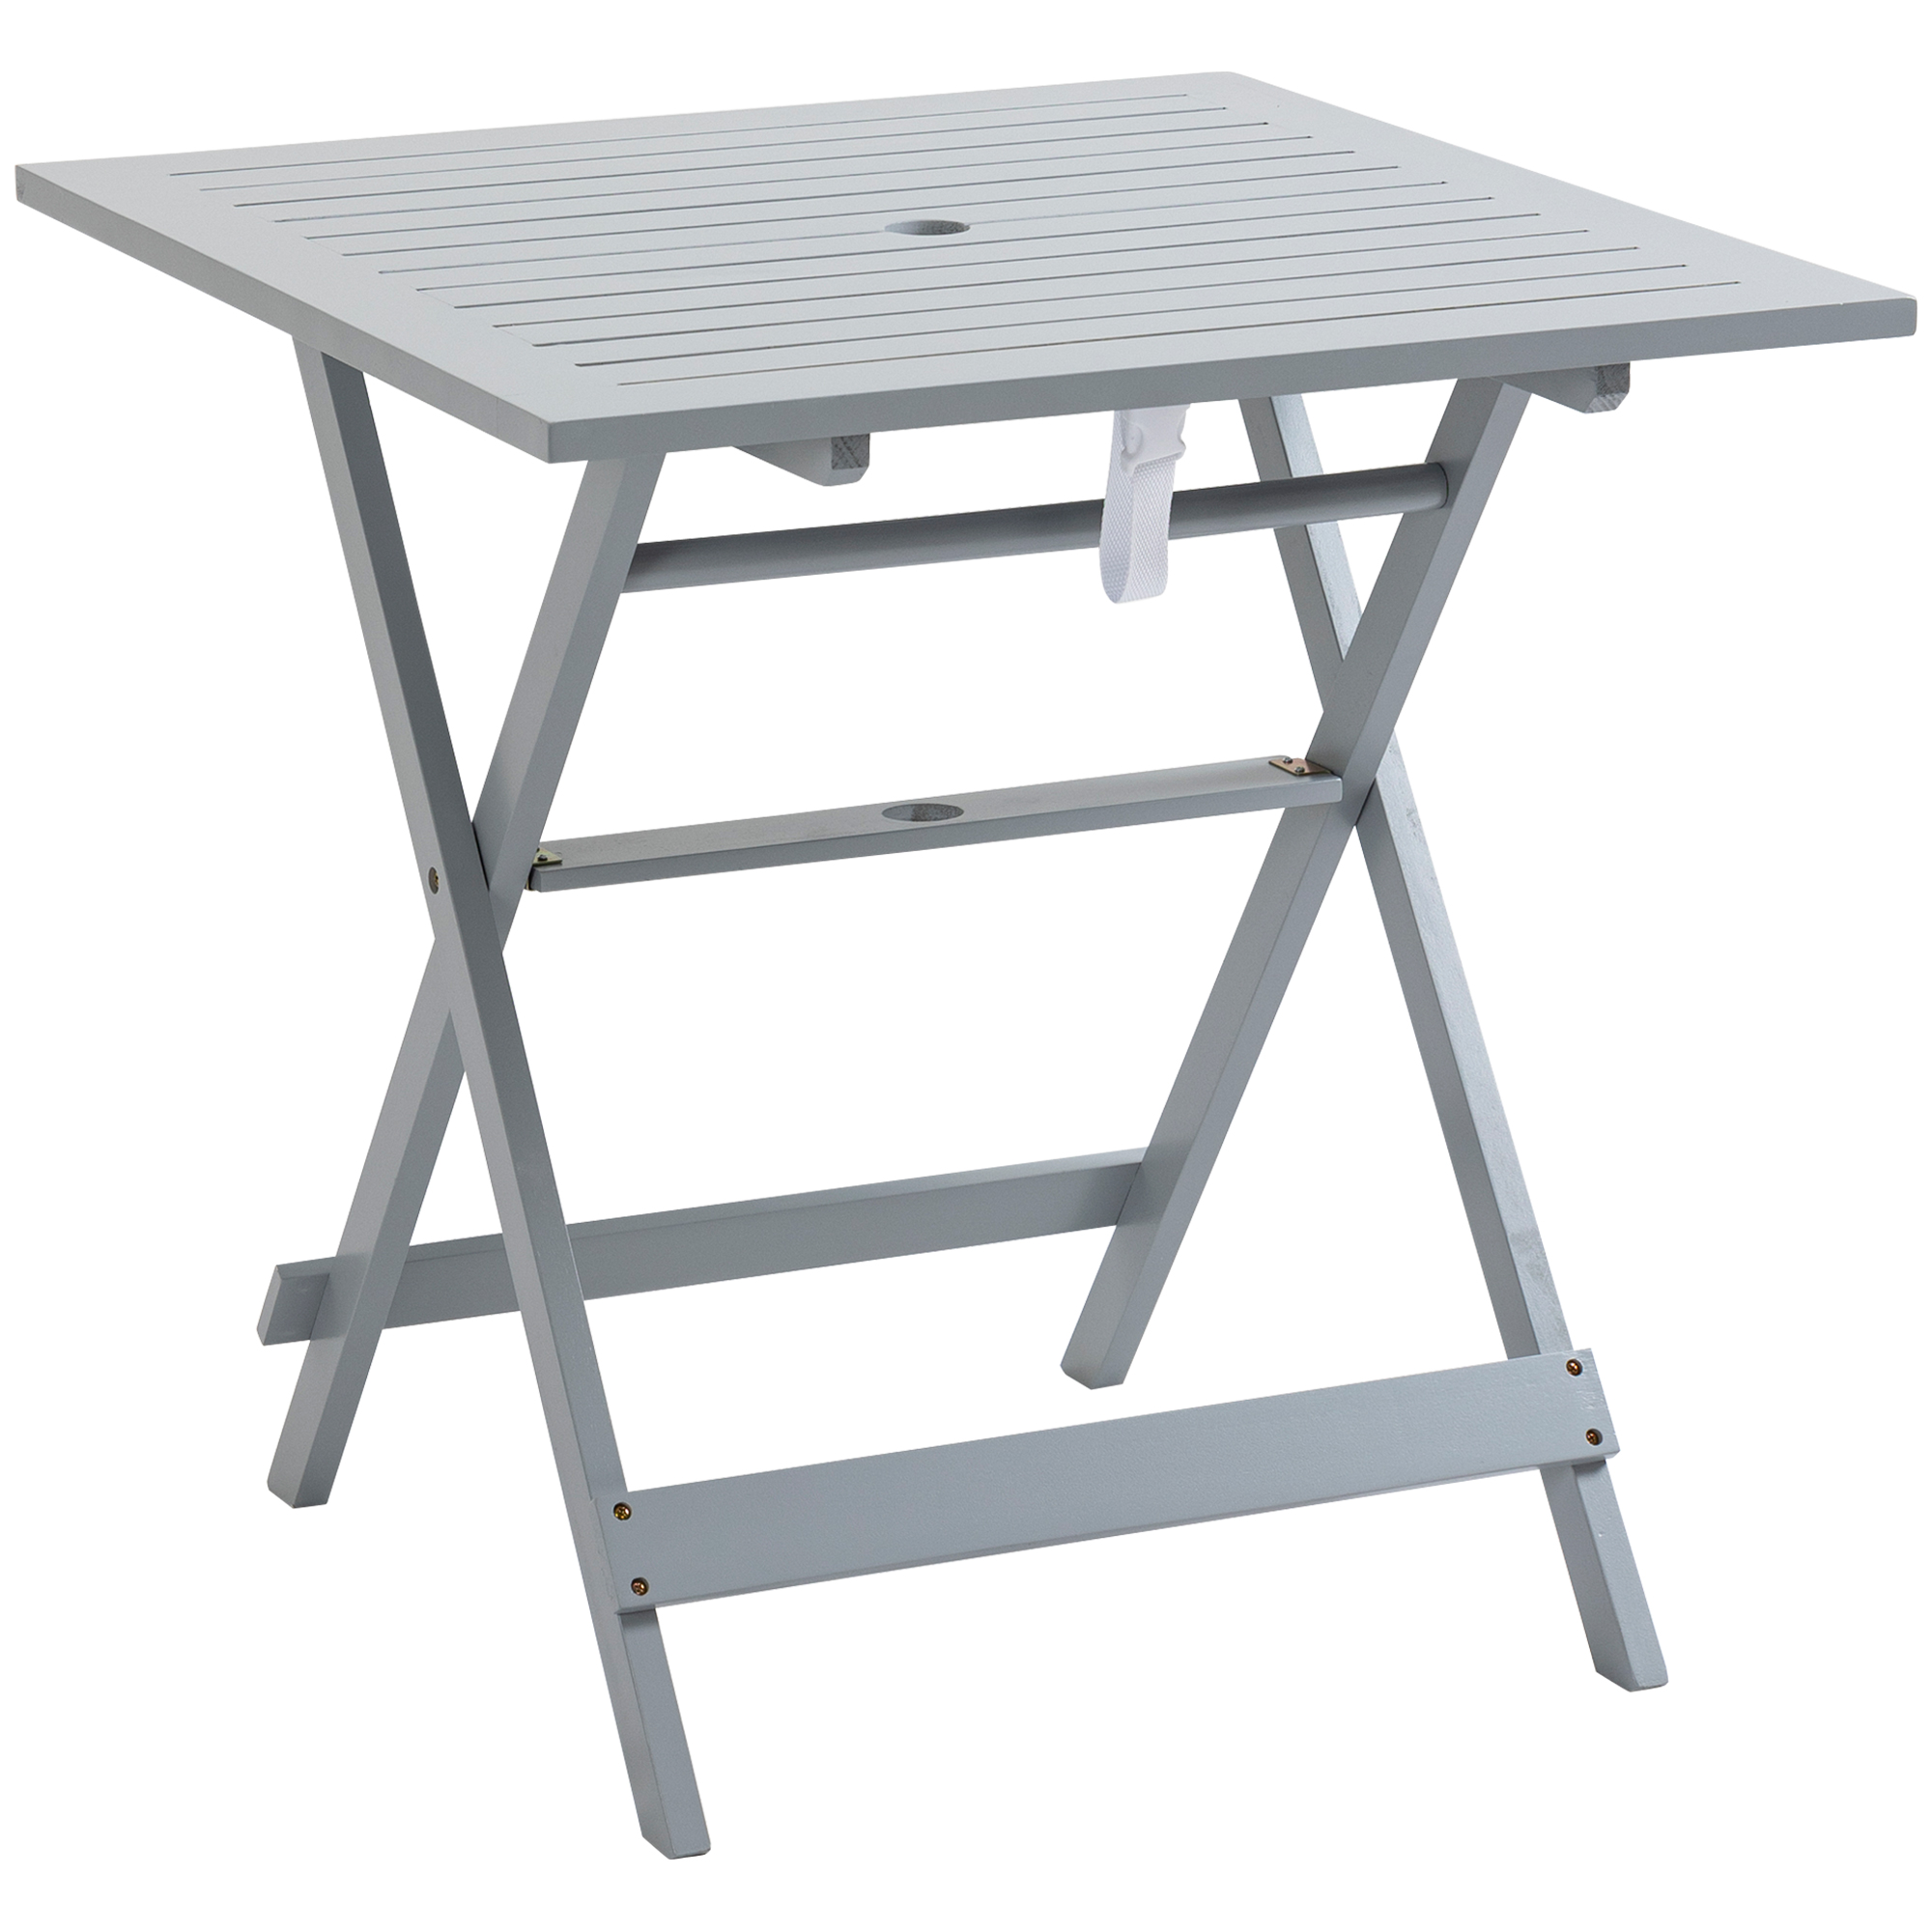 Outsunny Foldable Dining Table, Square Wood Side Table, Gray - image 1 of 9